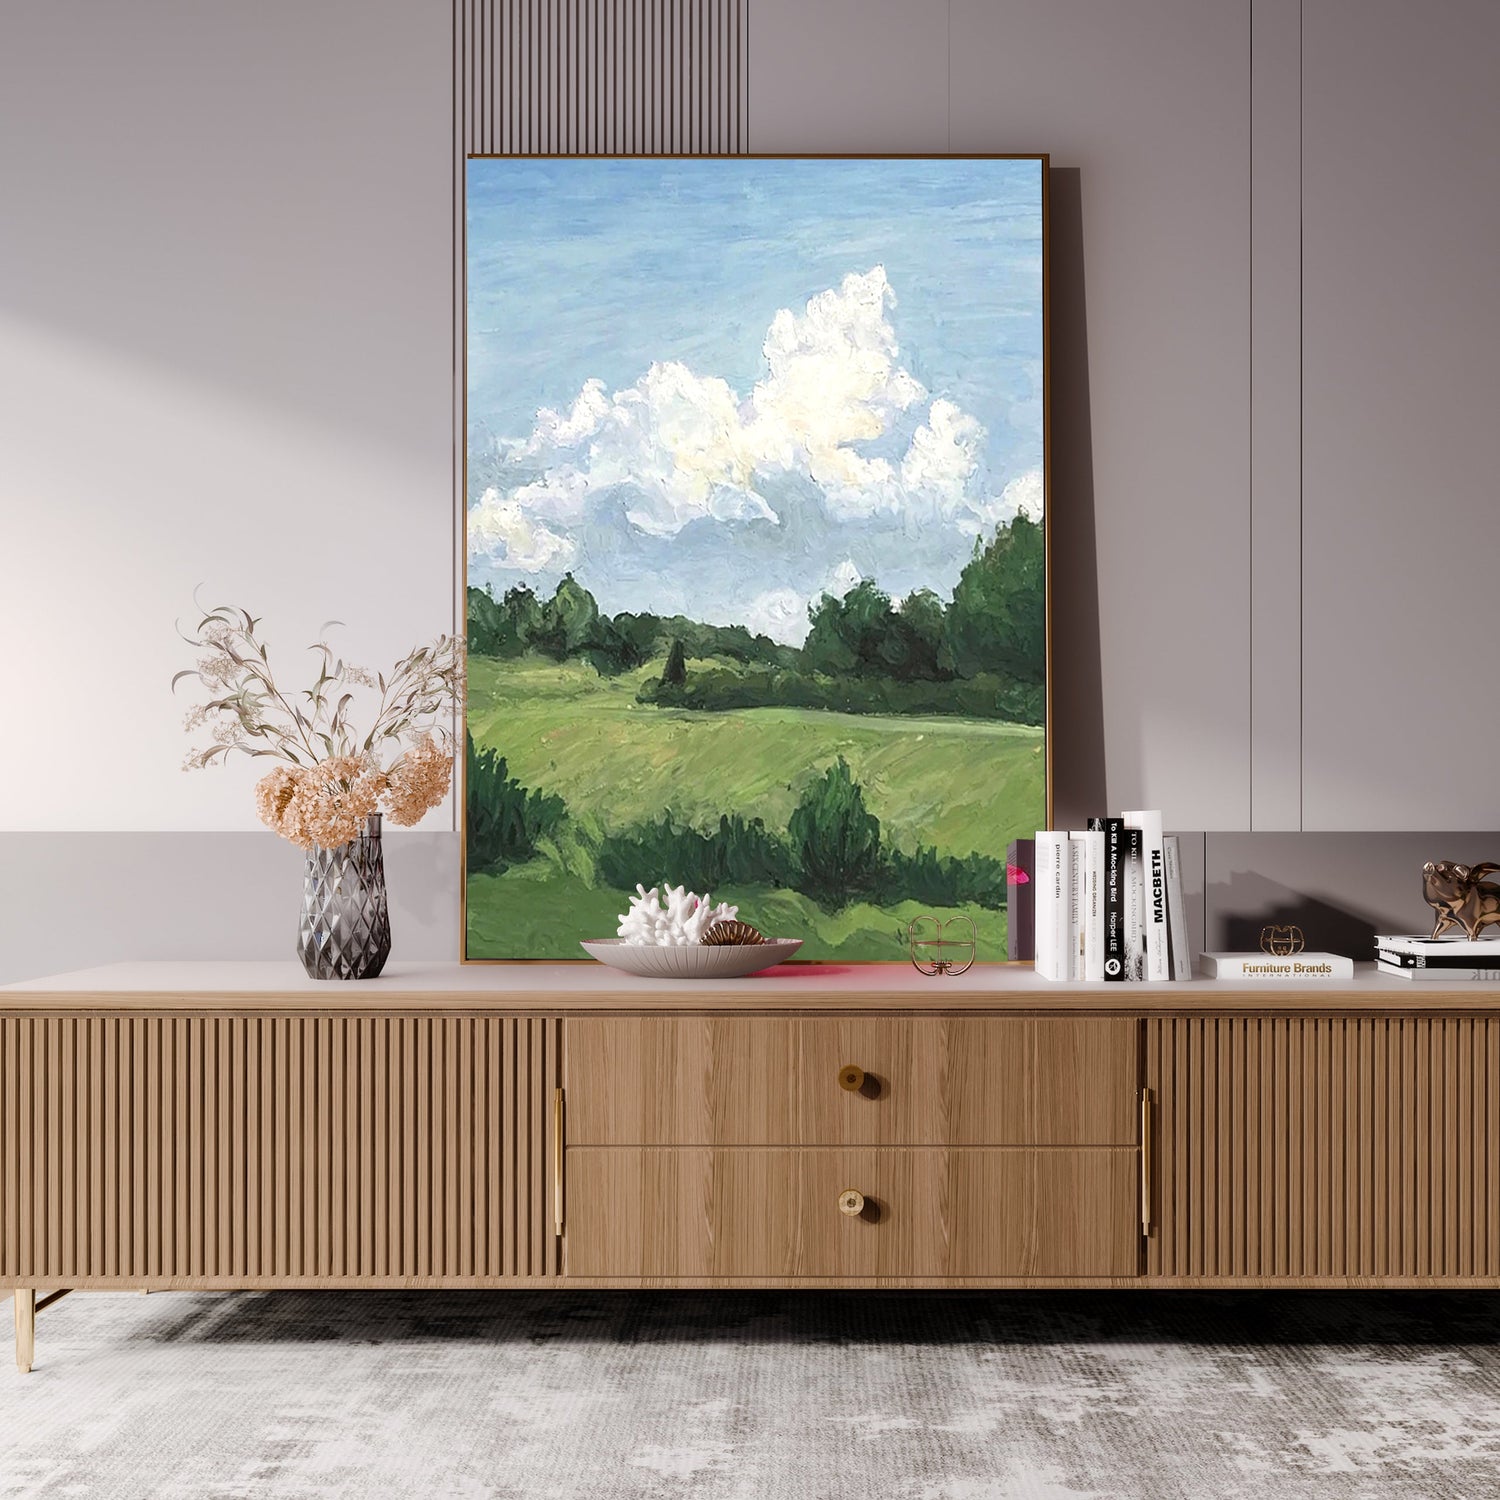 Peaceful Land, Landscape Painting Australia, Hand-painted Canvas,artists like andy warhol,,artists like claude monet,artists like monet,artists like salvador dali